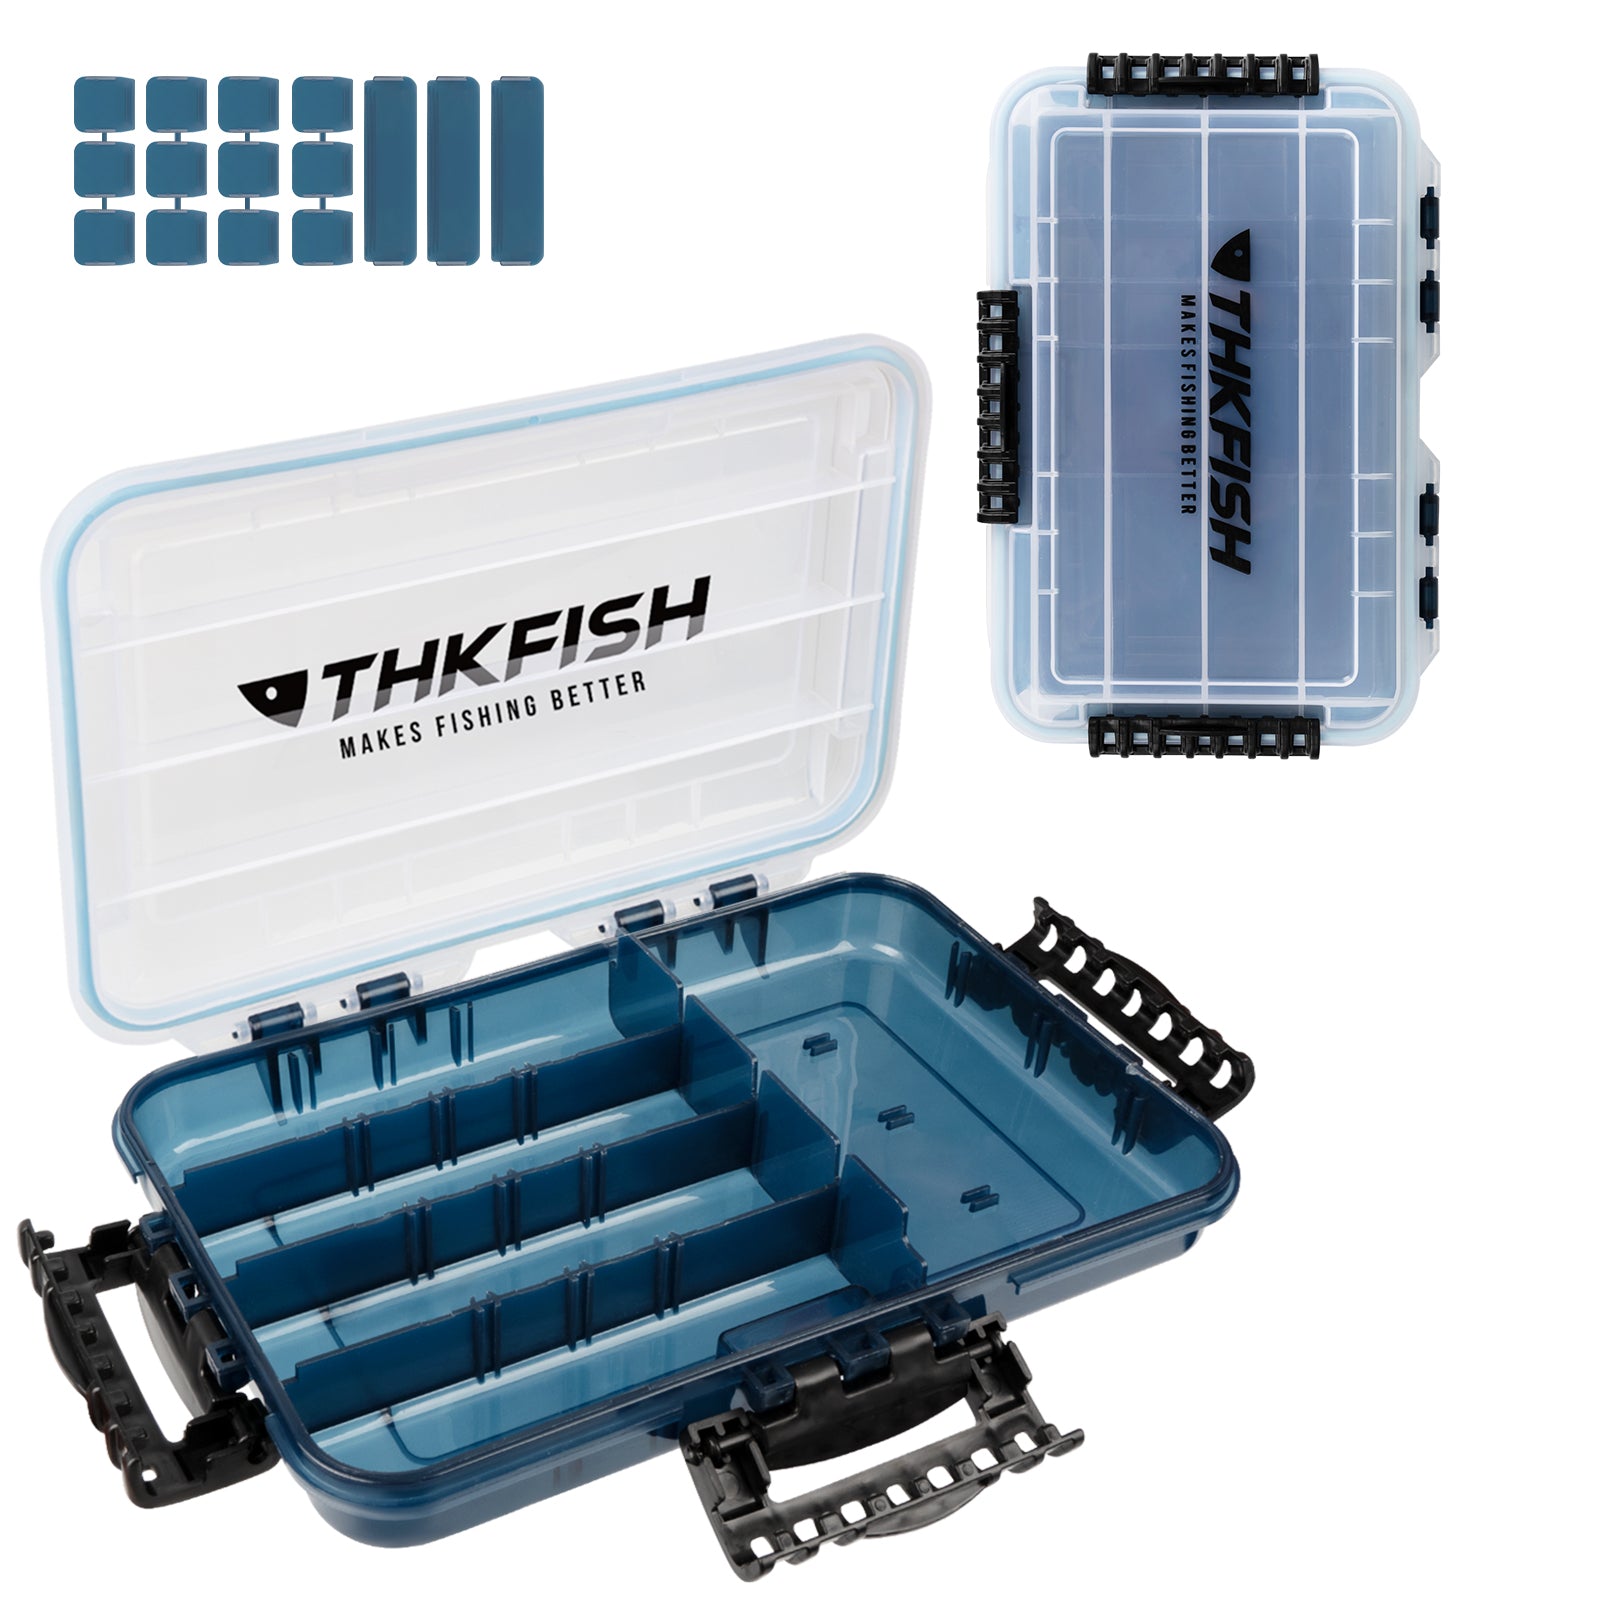 THKFISH 3600/3700 Large Fishing Tackle Lure Bait Box for Sale